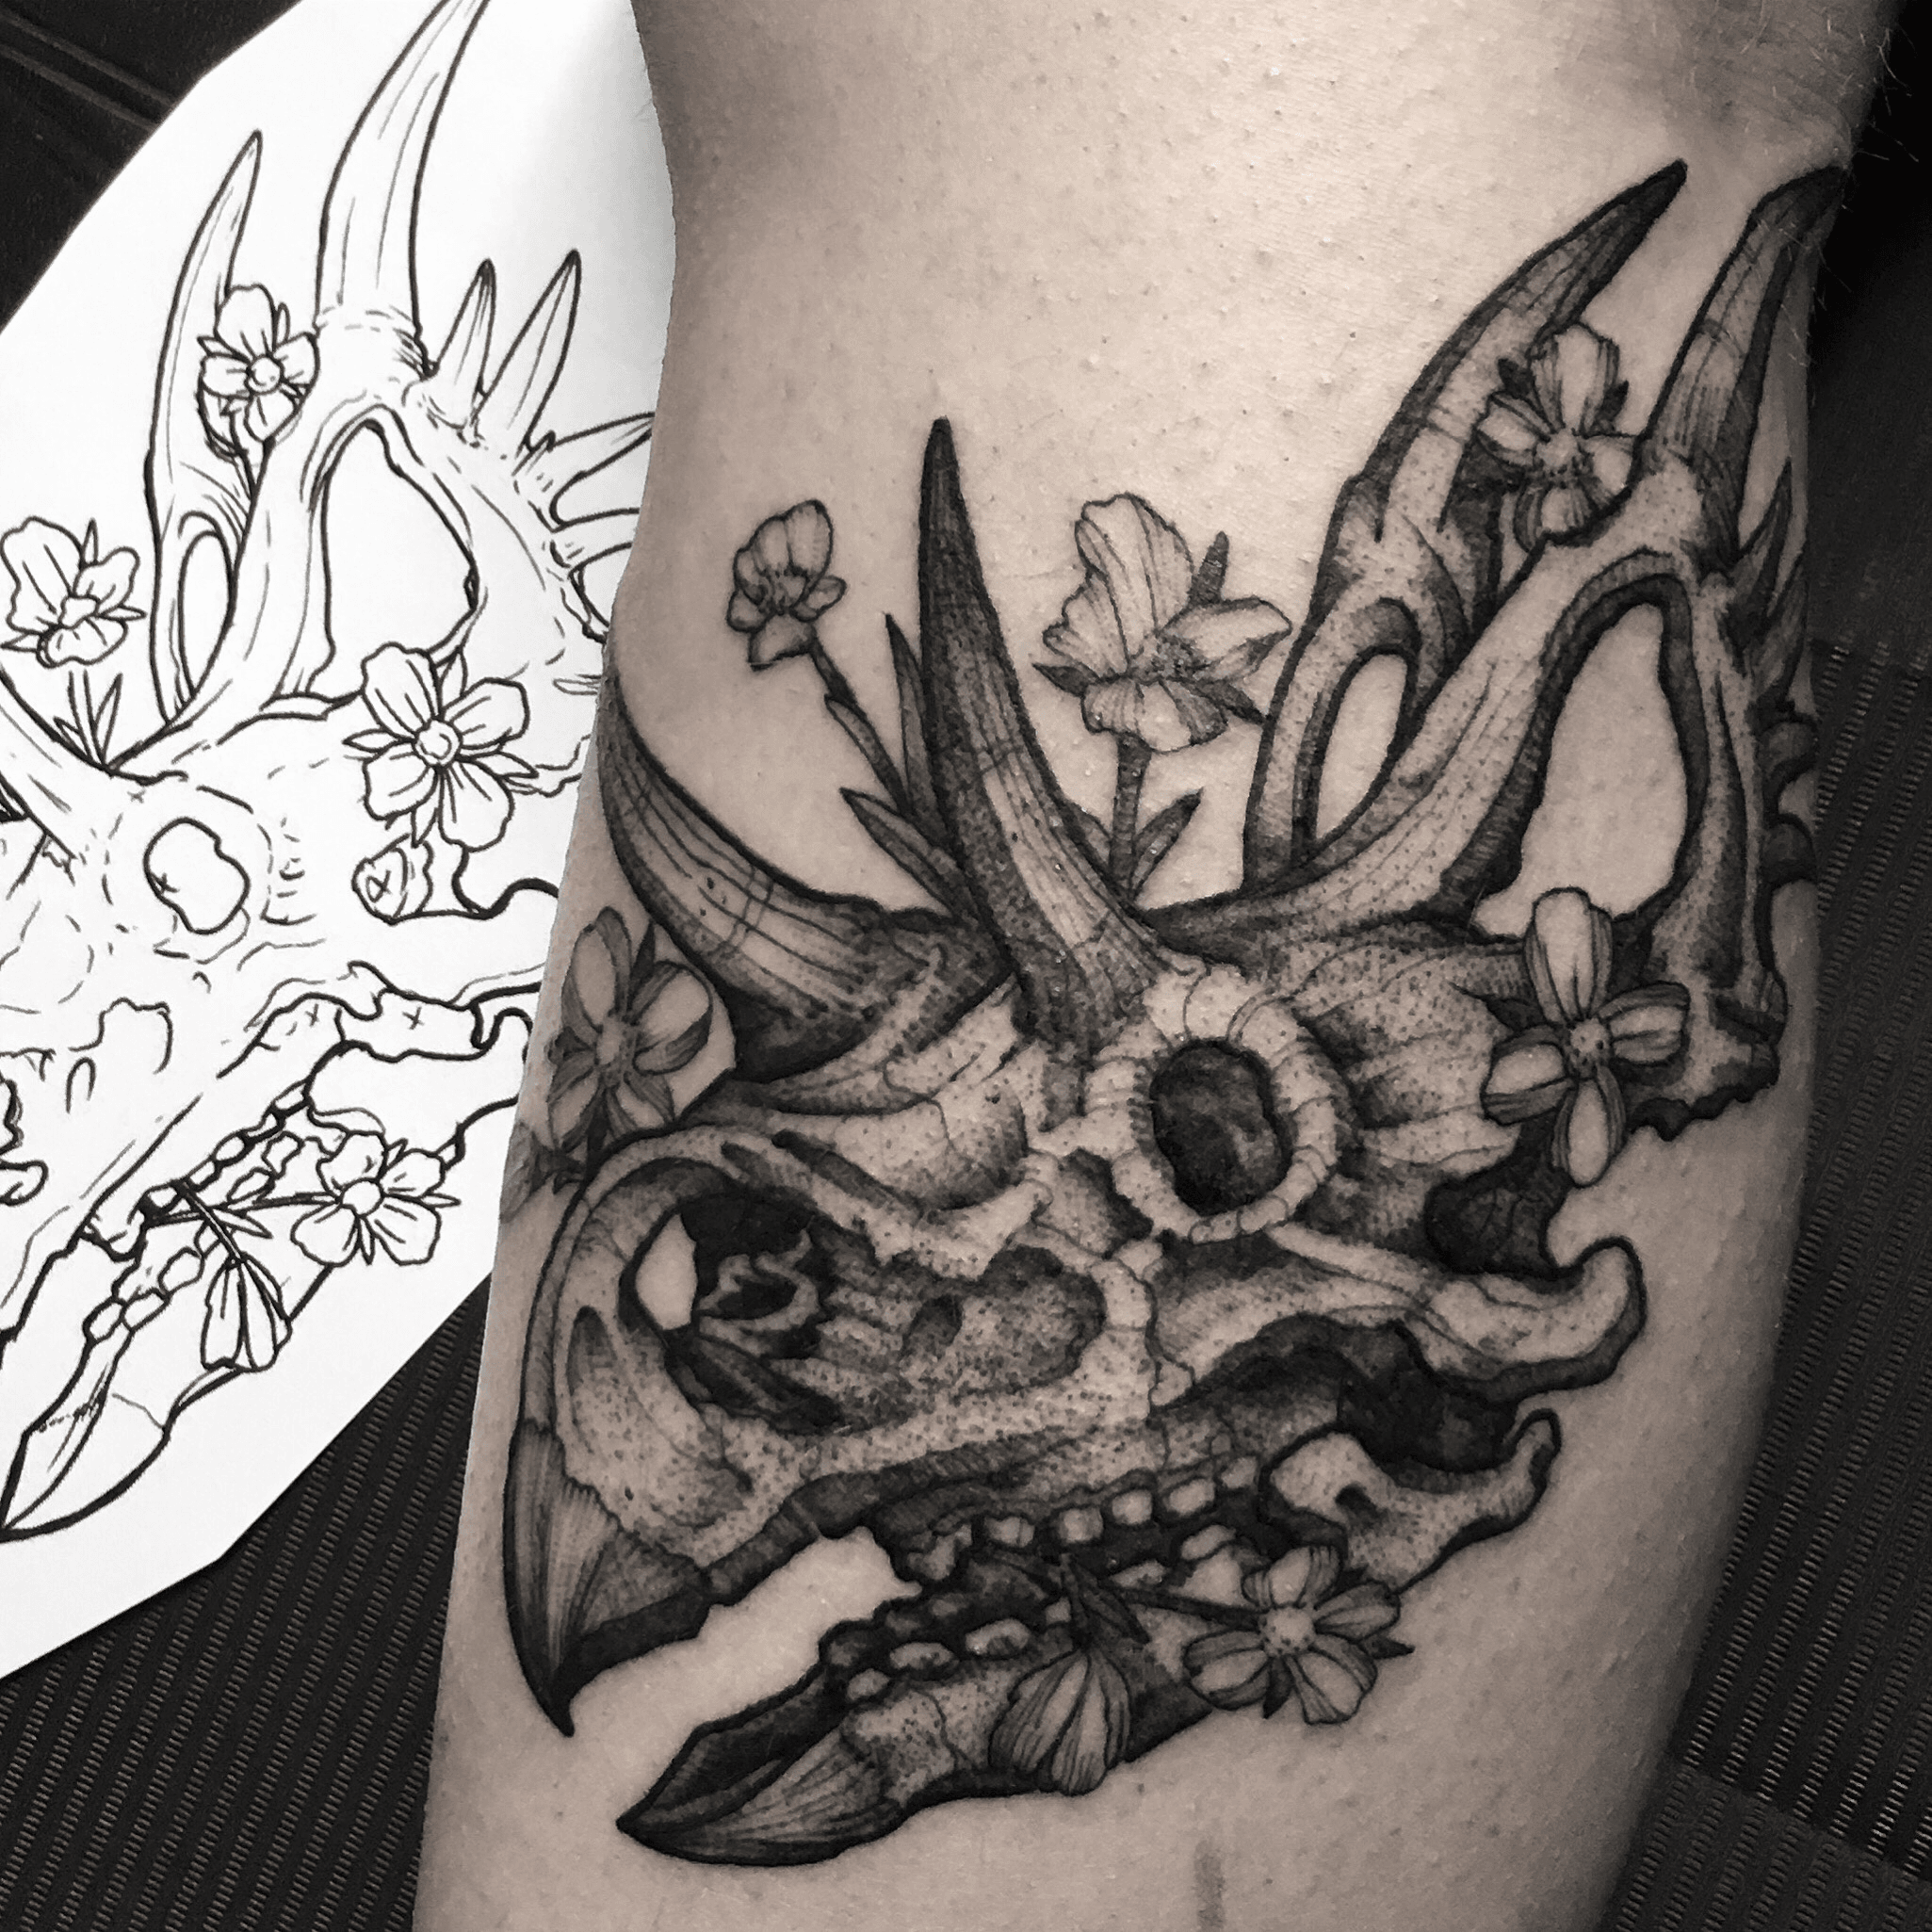 triceratops skull drawing a lot of wrap on the tattoo   Flickr